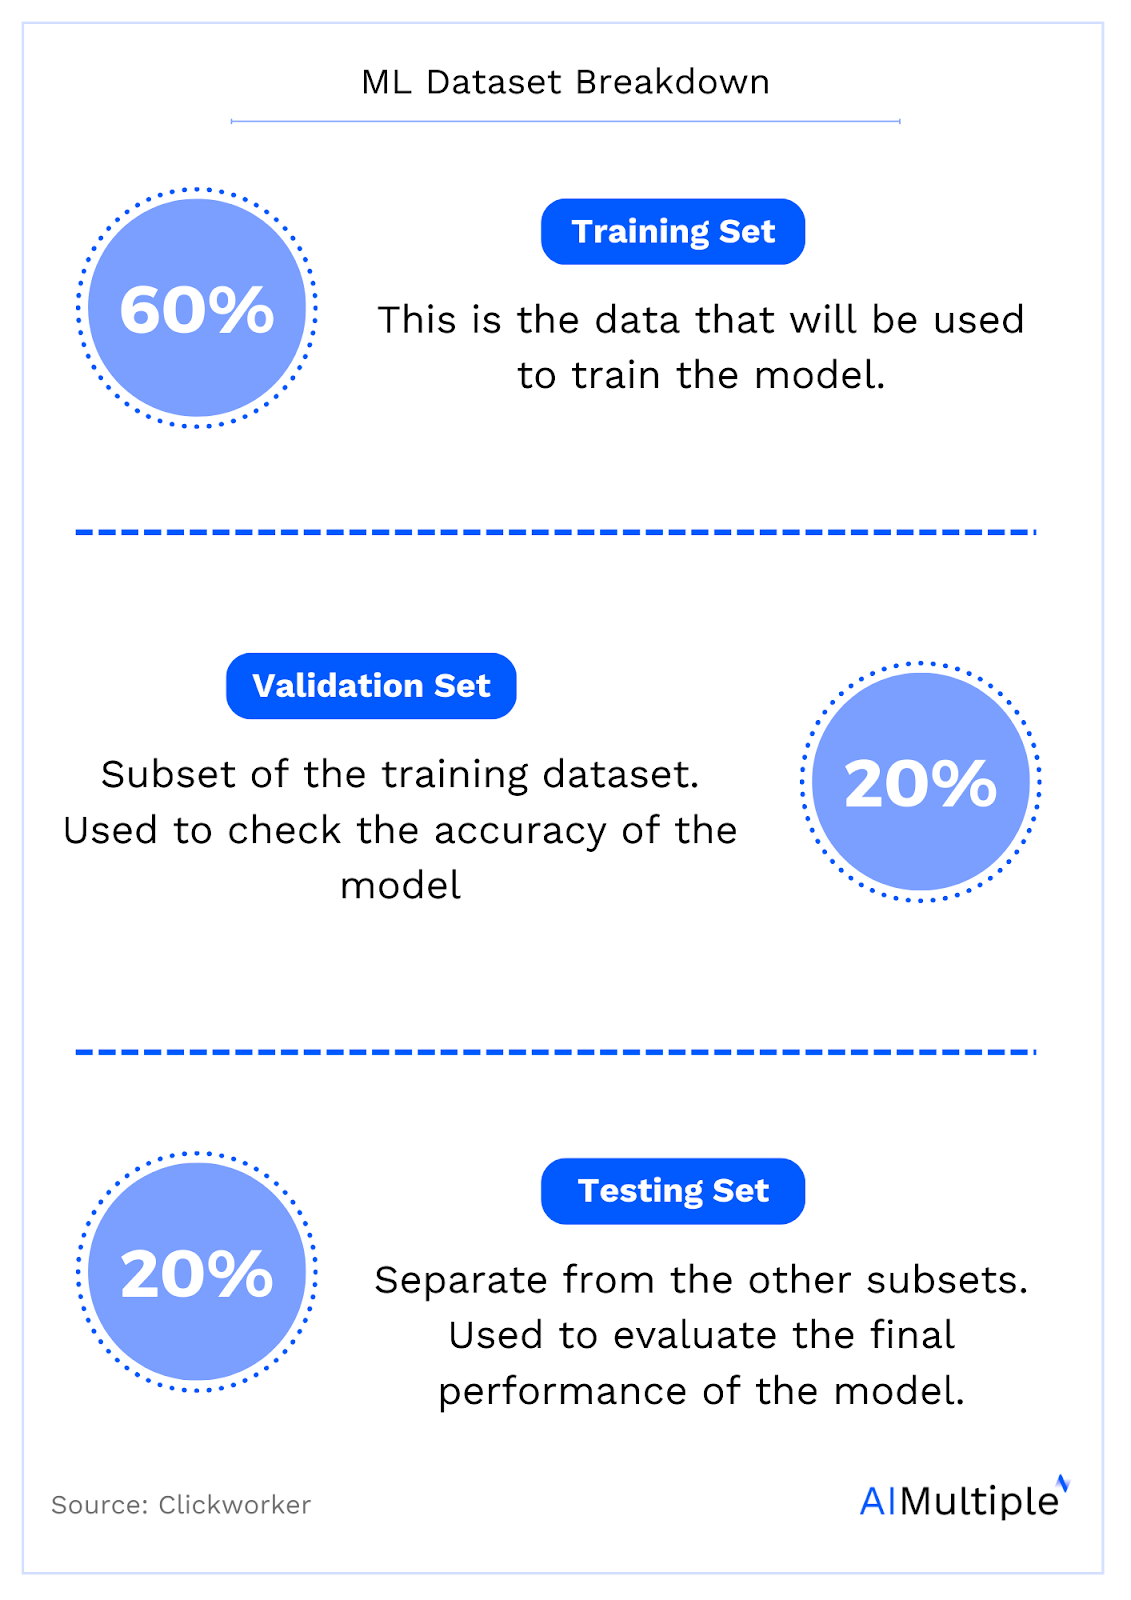 The ratio of training, validation, and testing data in datasets for ml. To explain the portions of datasets for ml. 60 percent is the training set, 20% is the validation set, and 20% is the testing set. 